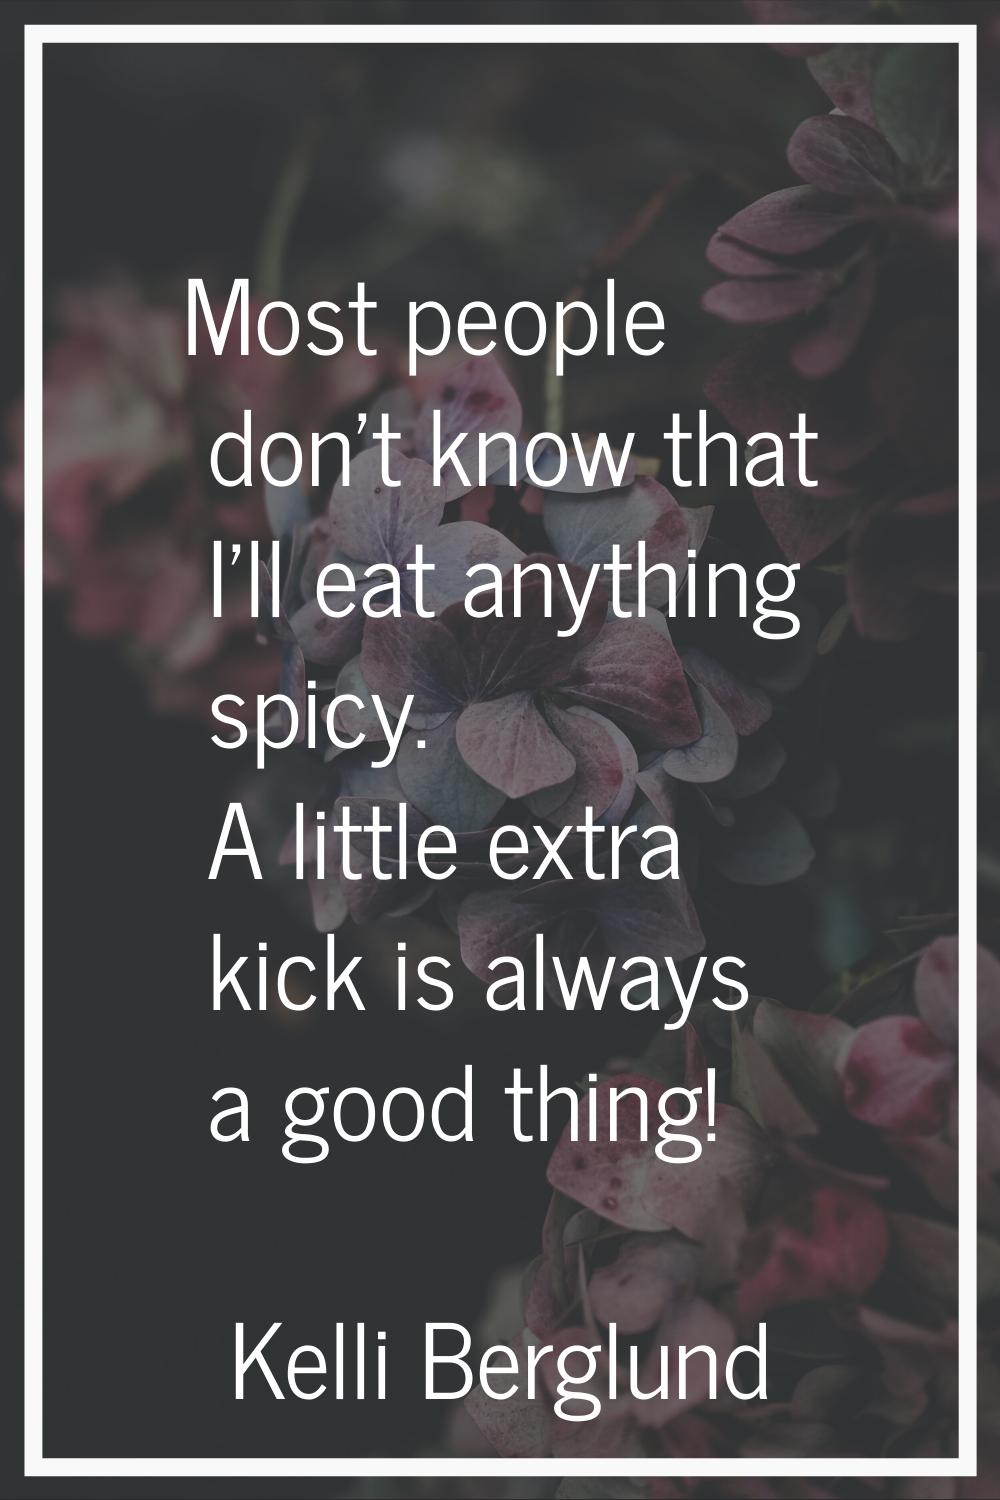 Most people don't know that I'll eat anything spicy. A little extra kick is always a good thing!